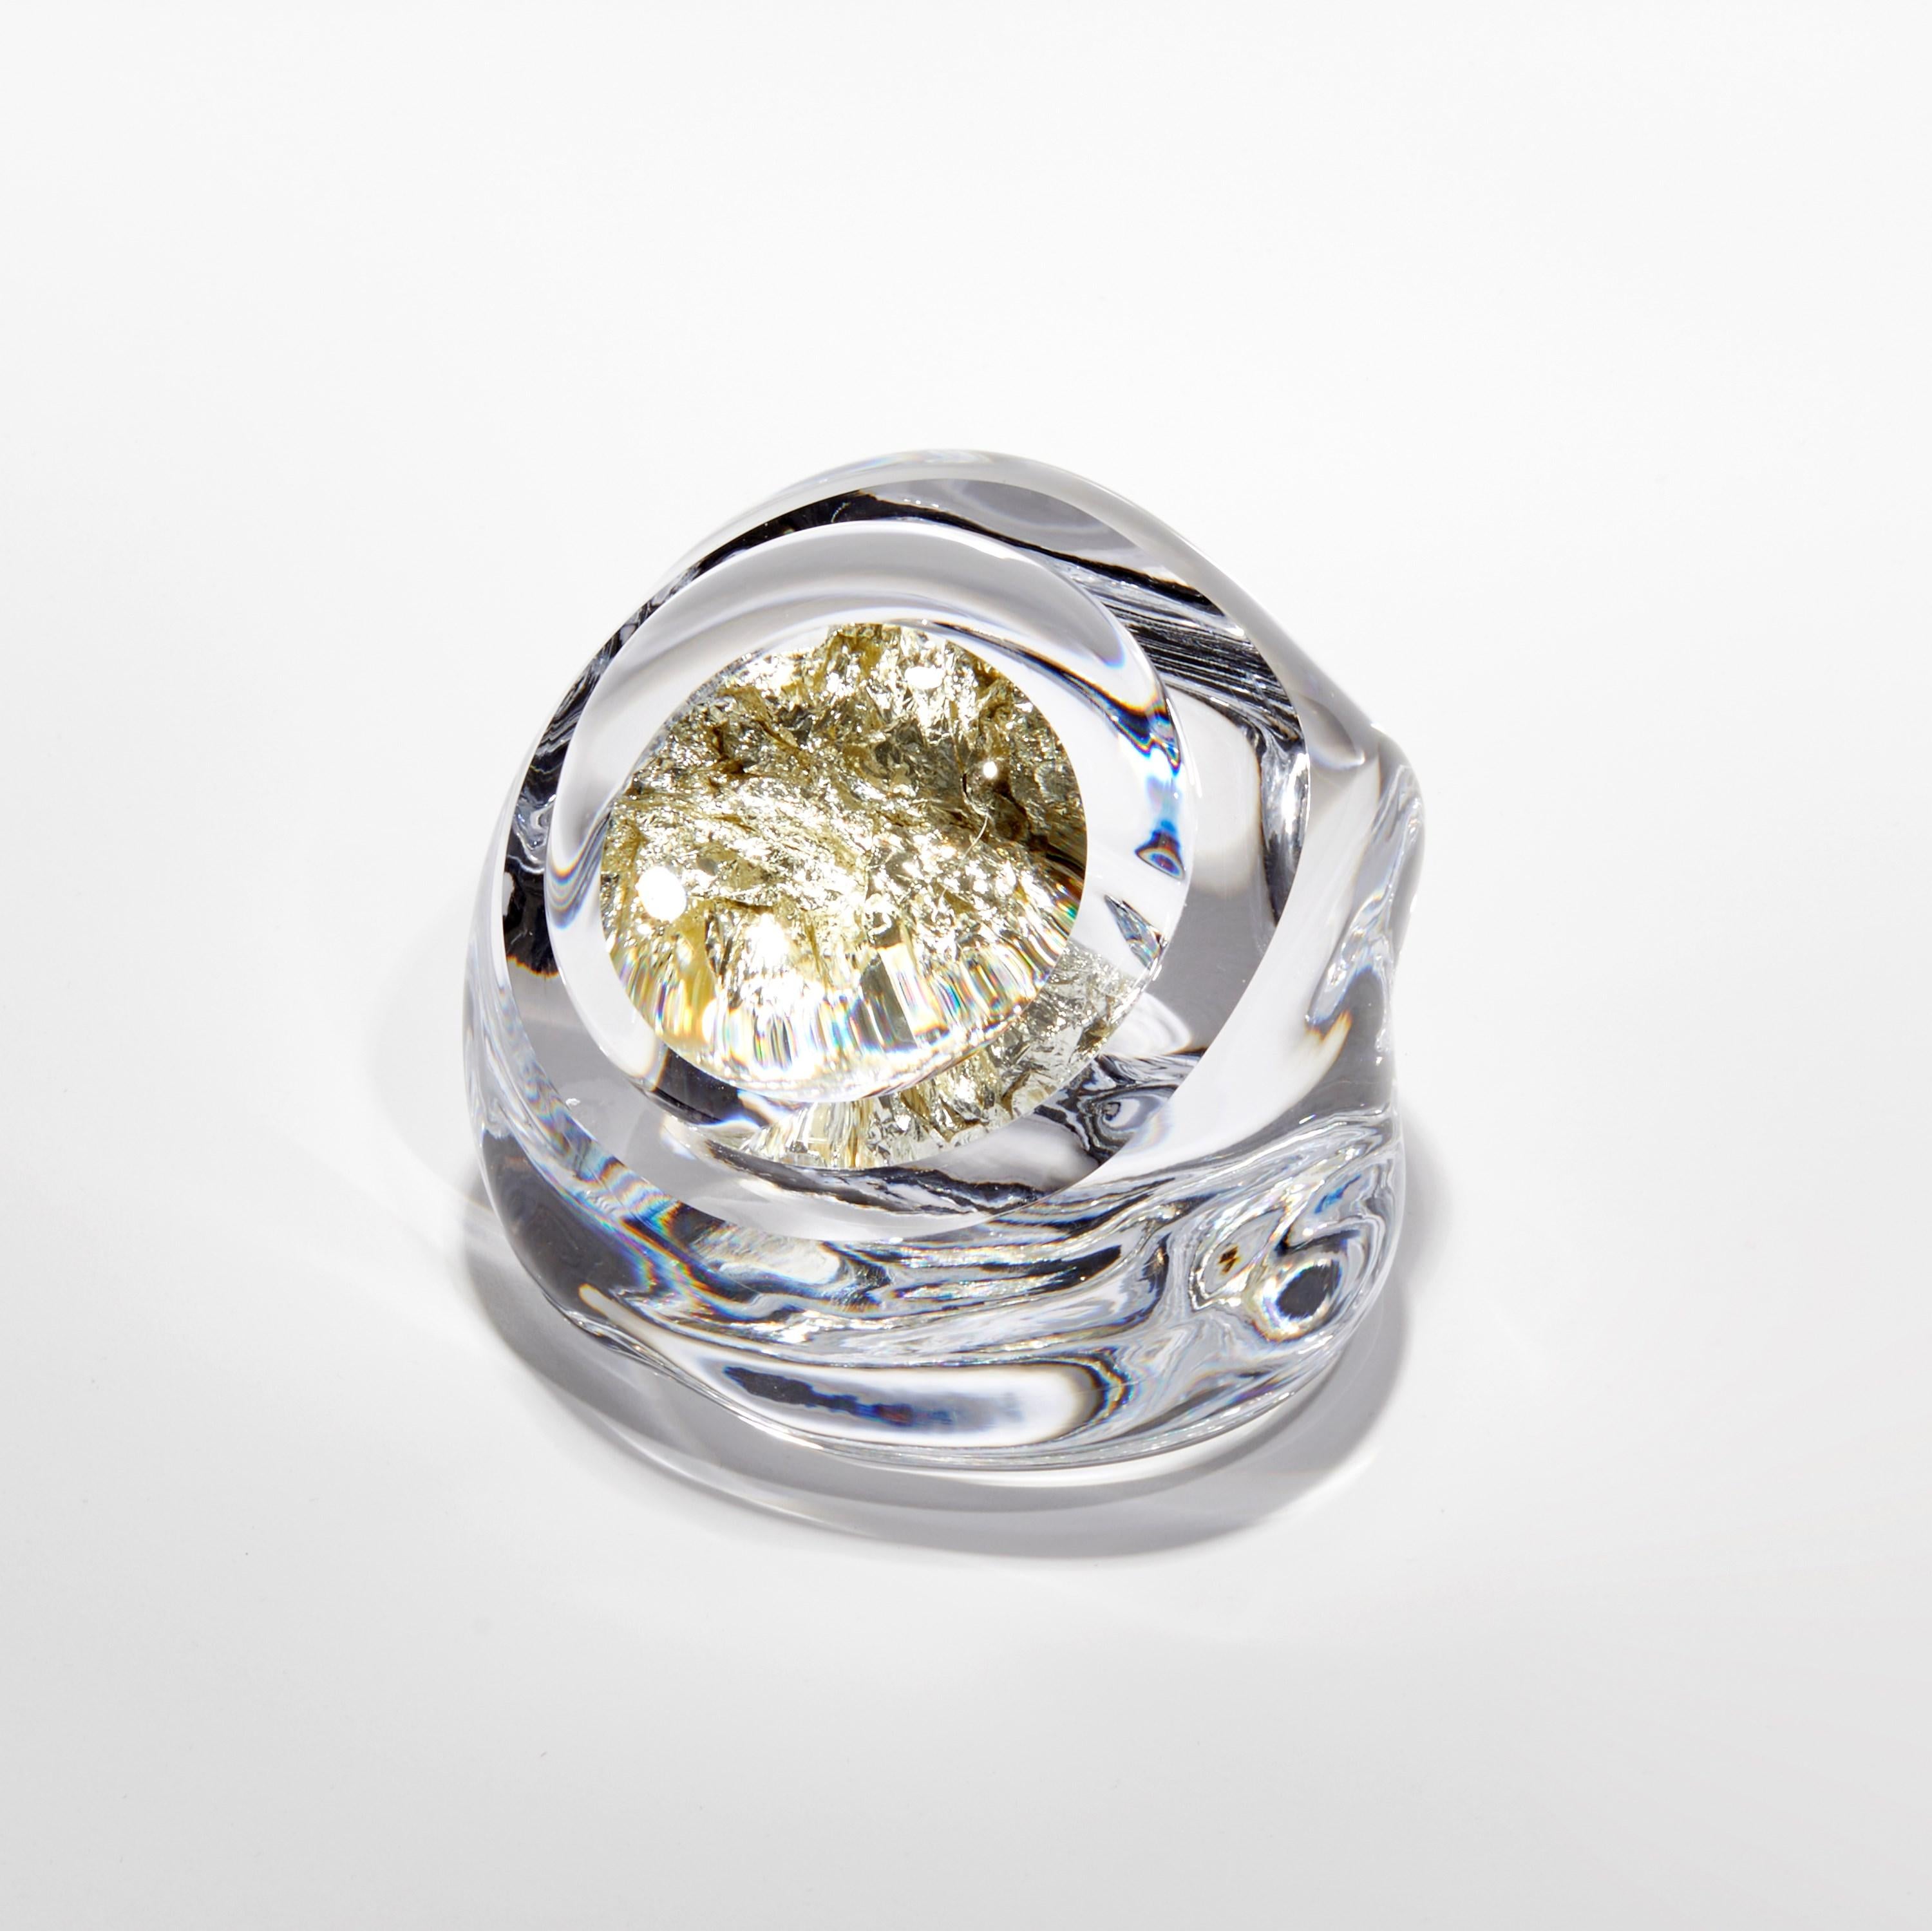 Organic Modern Erratic B with 12ct White Gold, a Glacier Rock Glass Sculpture by Anthony Scala